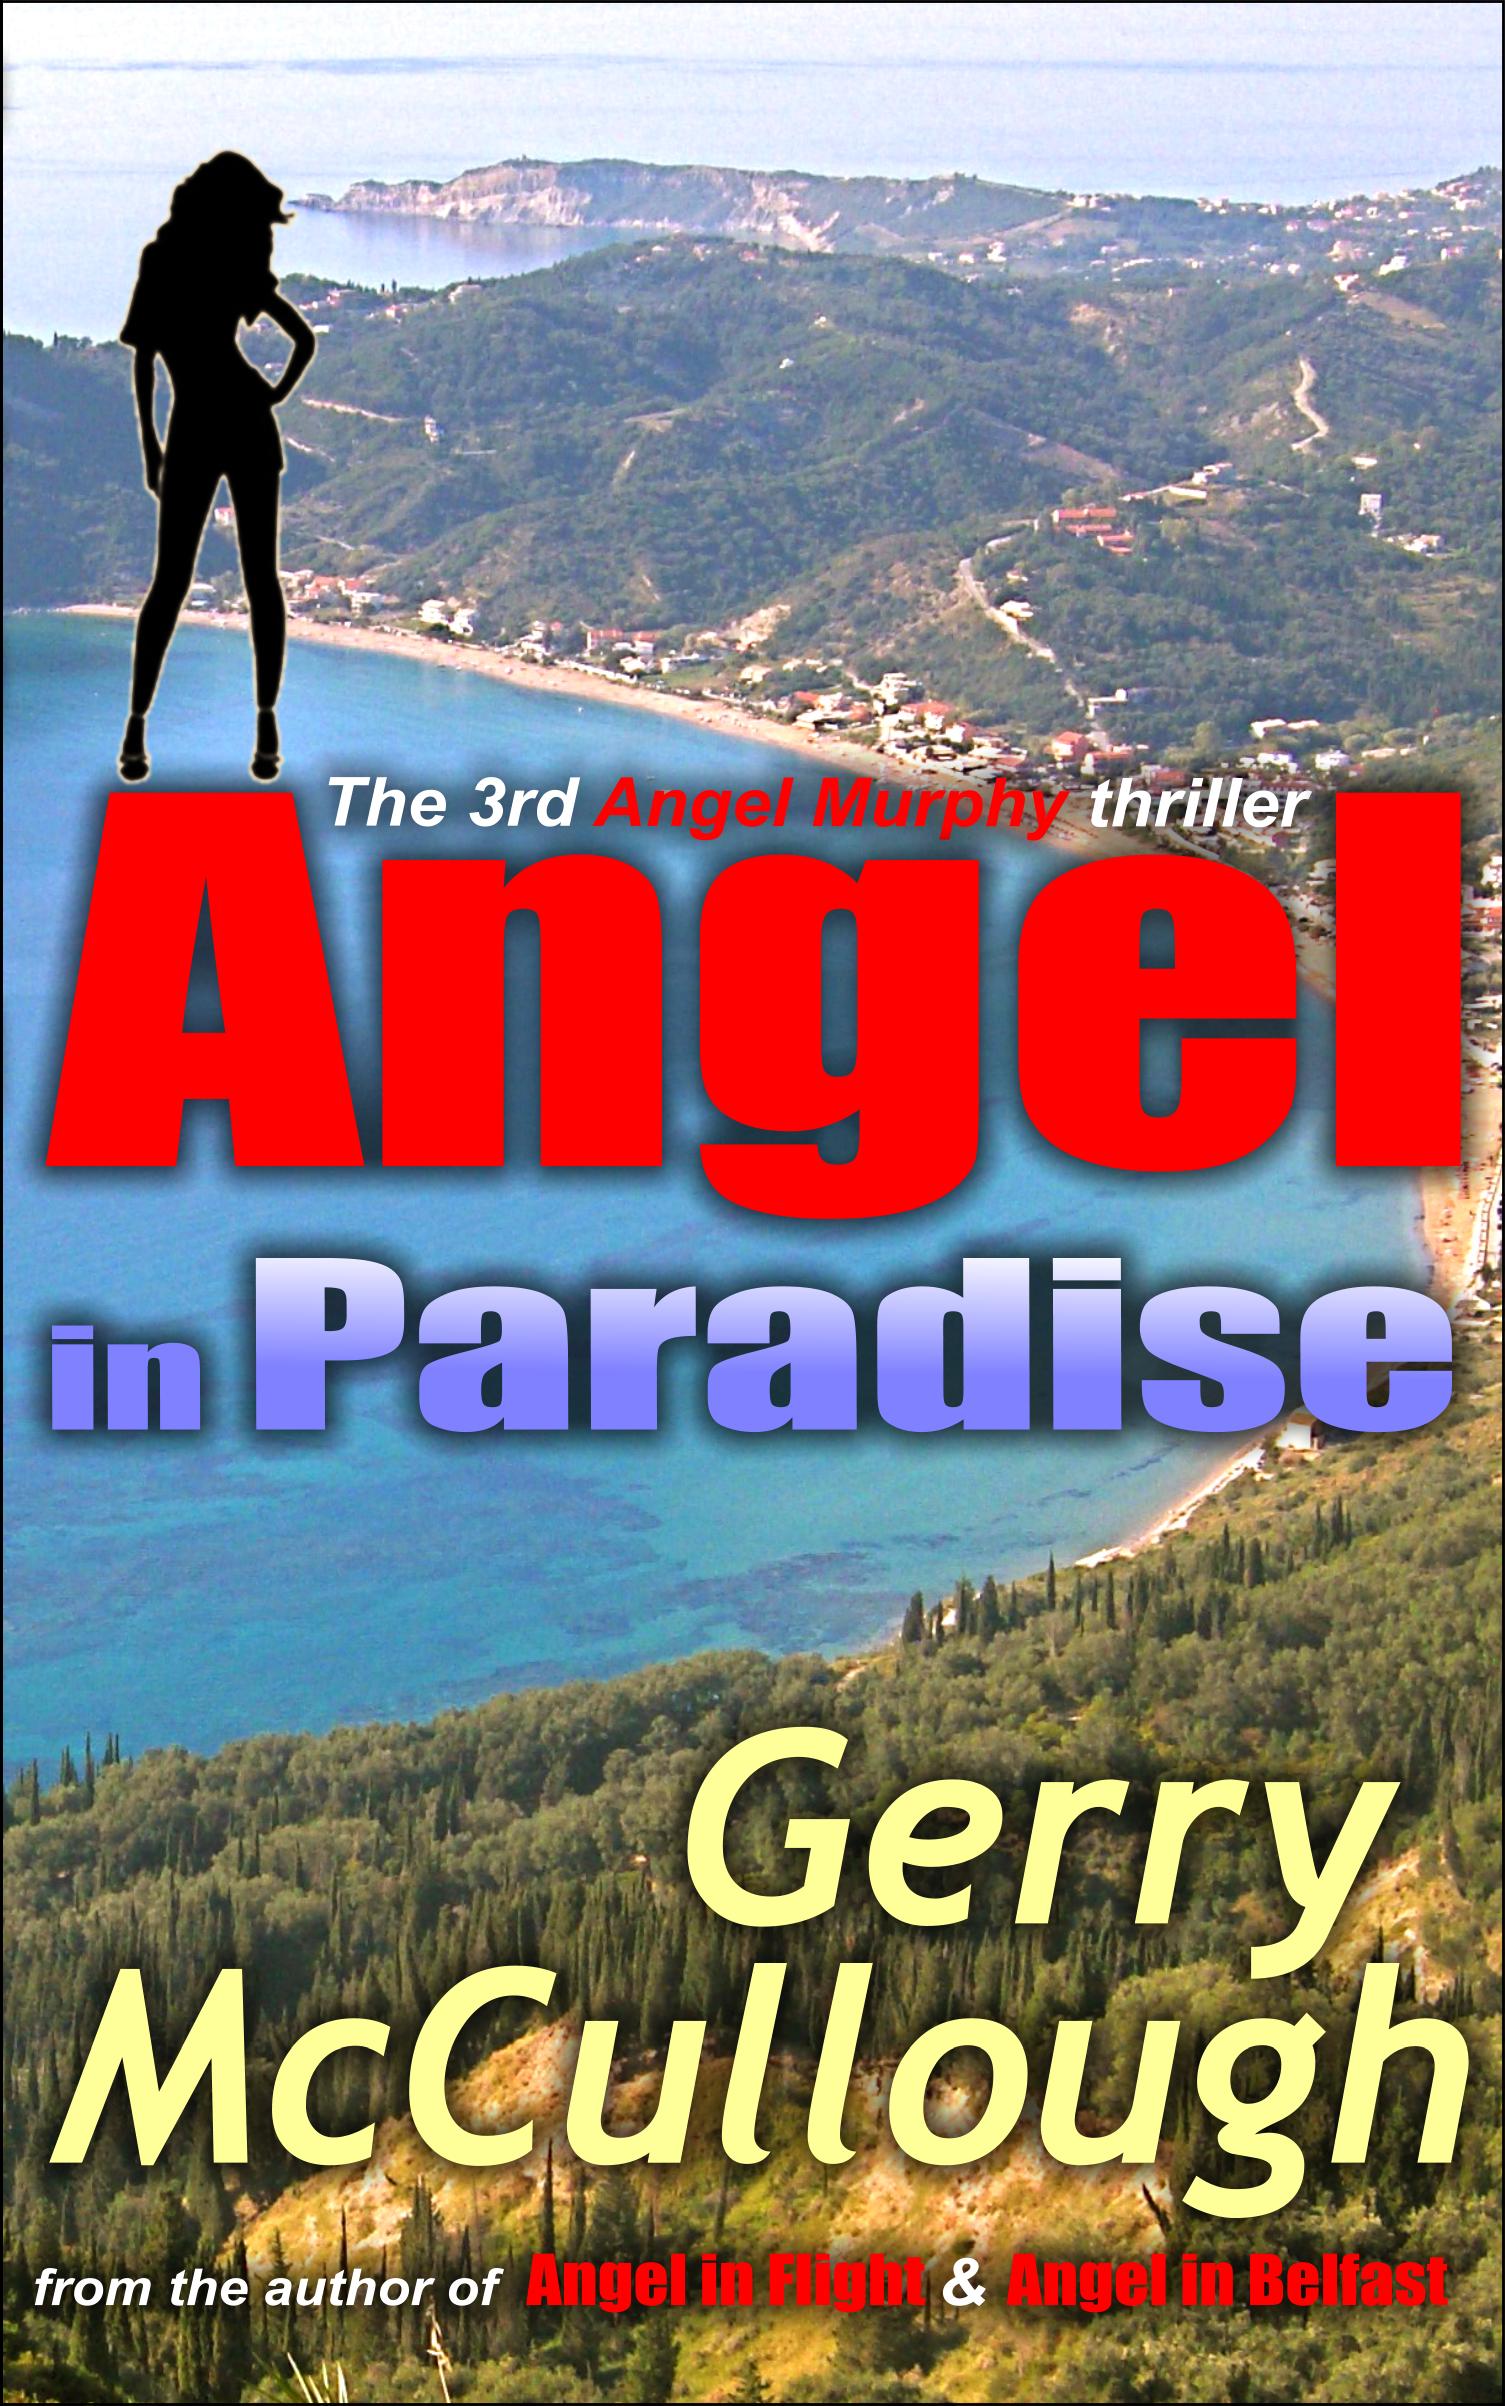 Buy Angel in Paradise from Amazon & other outlets